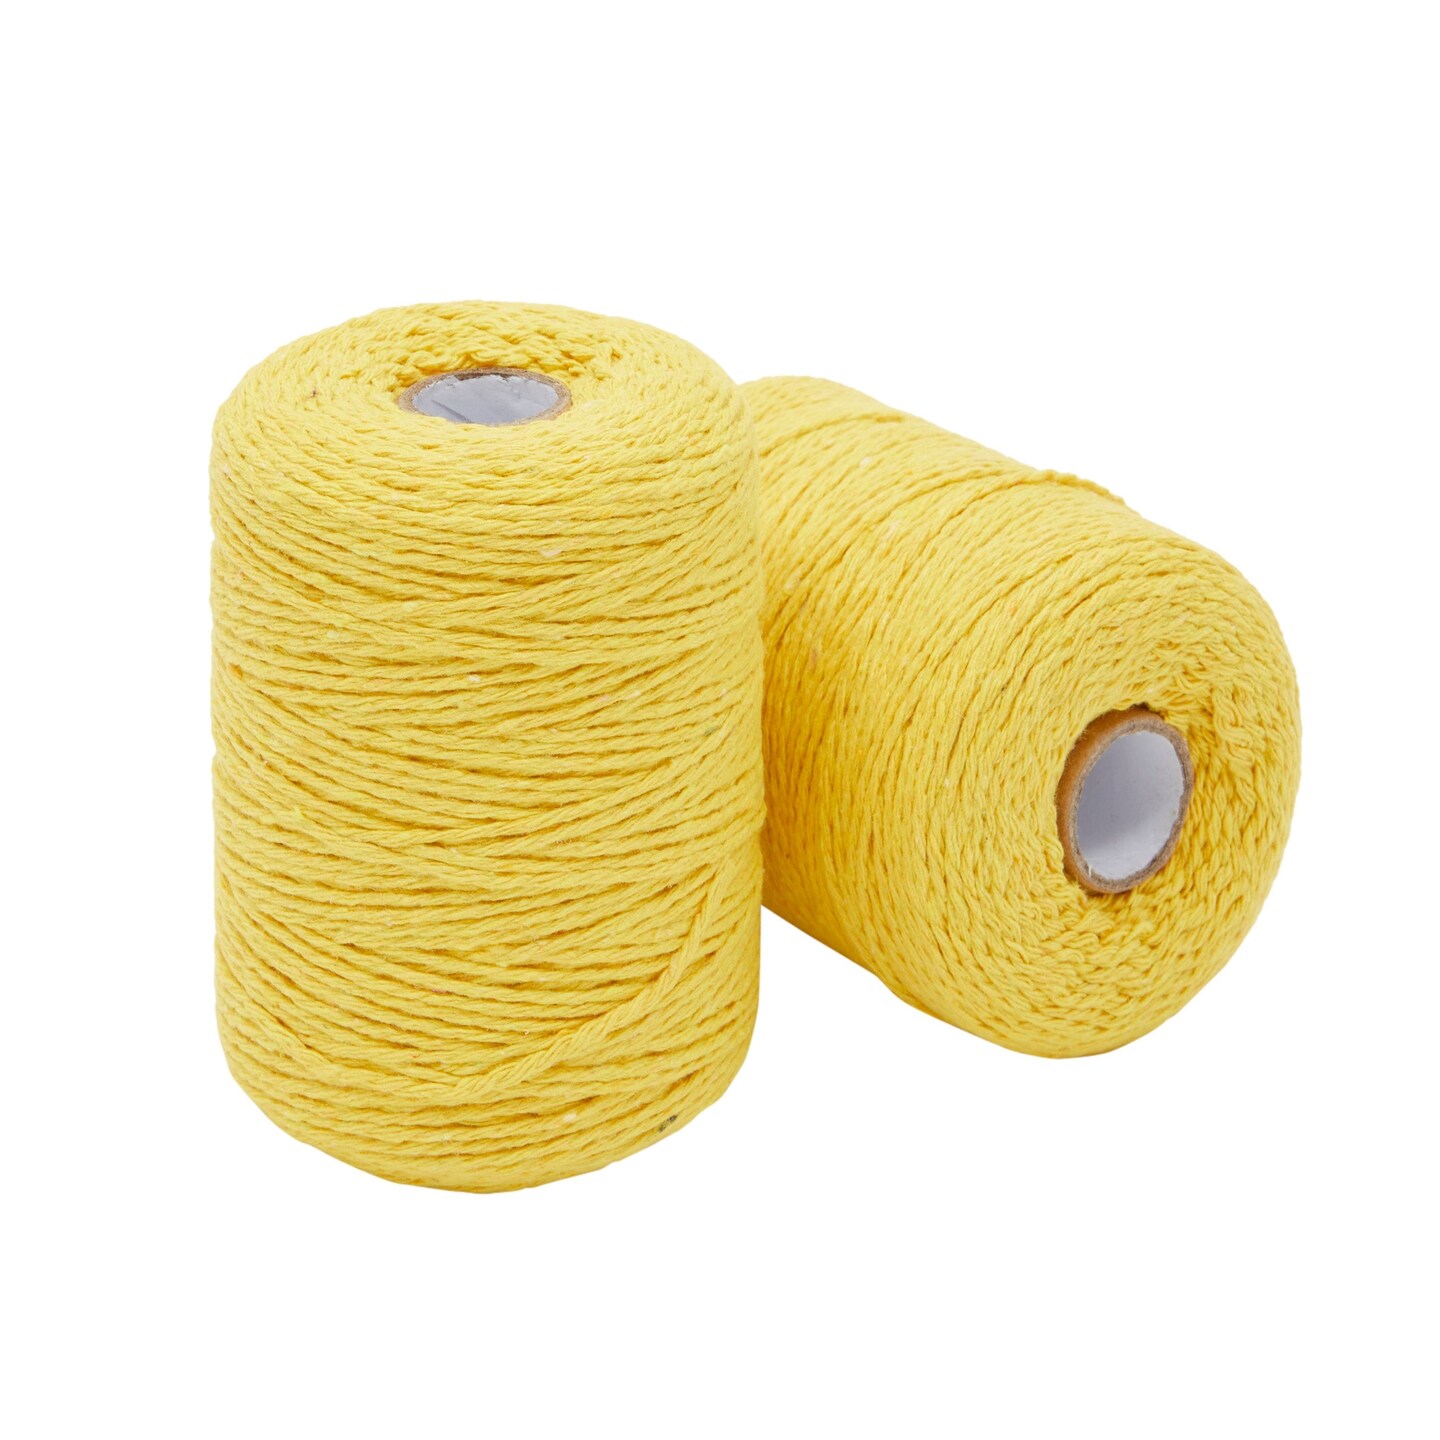 2mm Yellow Twine String for Crafts and Gift Wrapping (1300 ft, 2